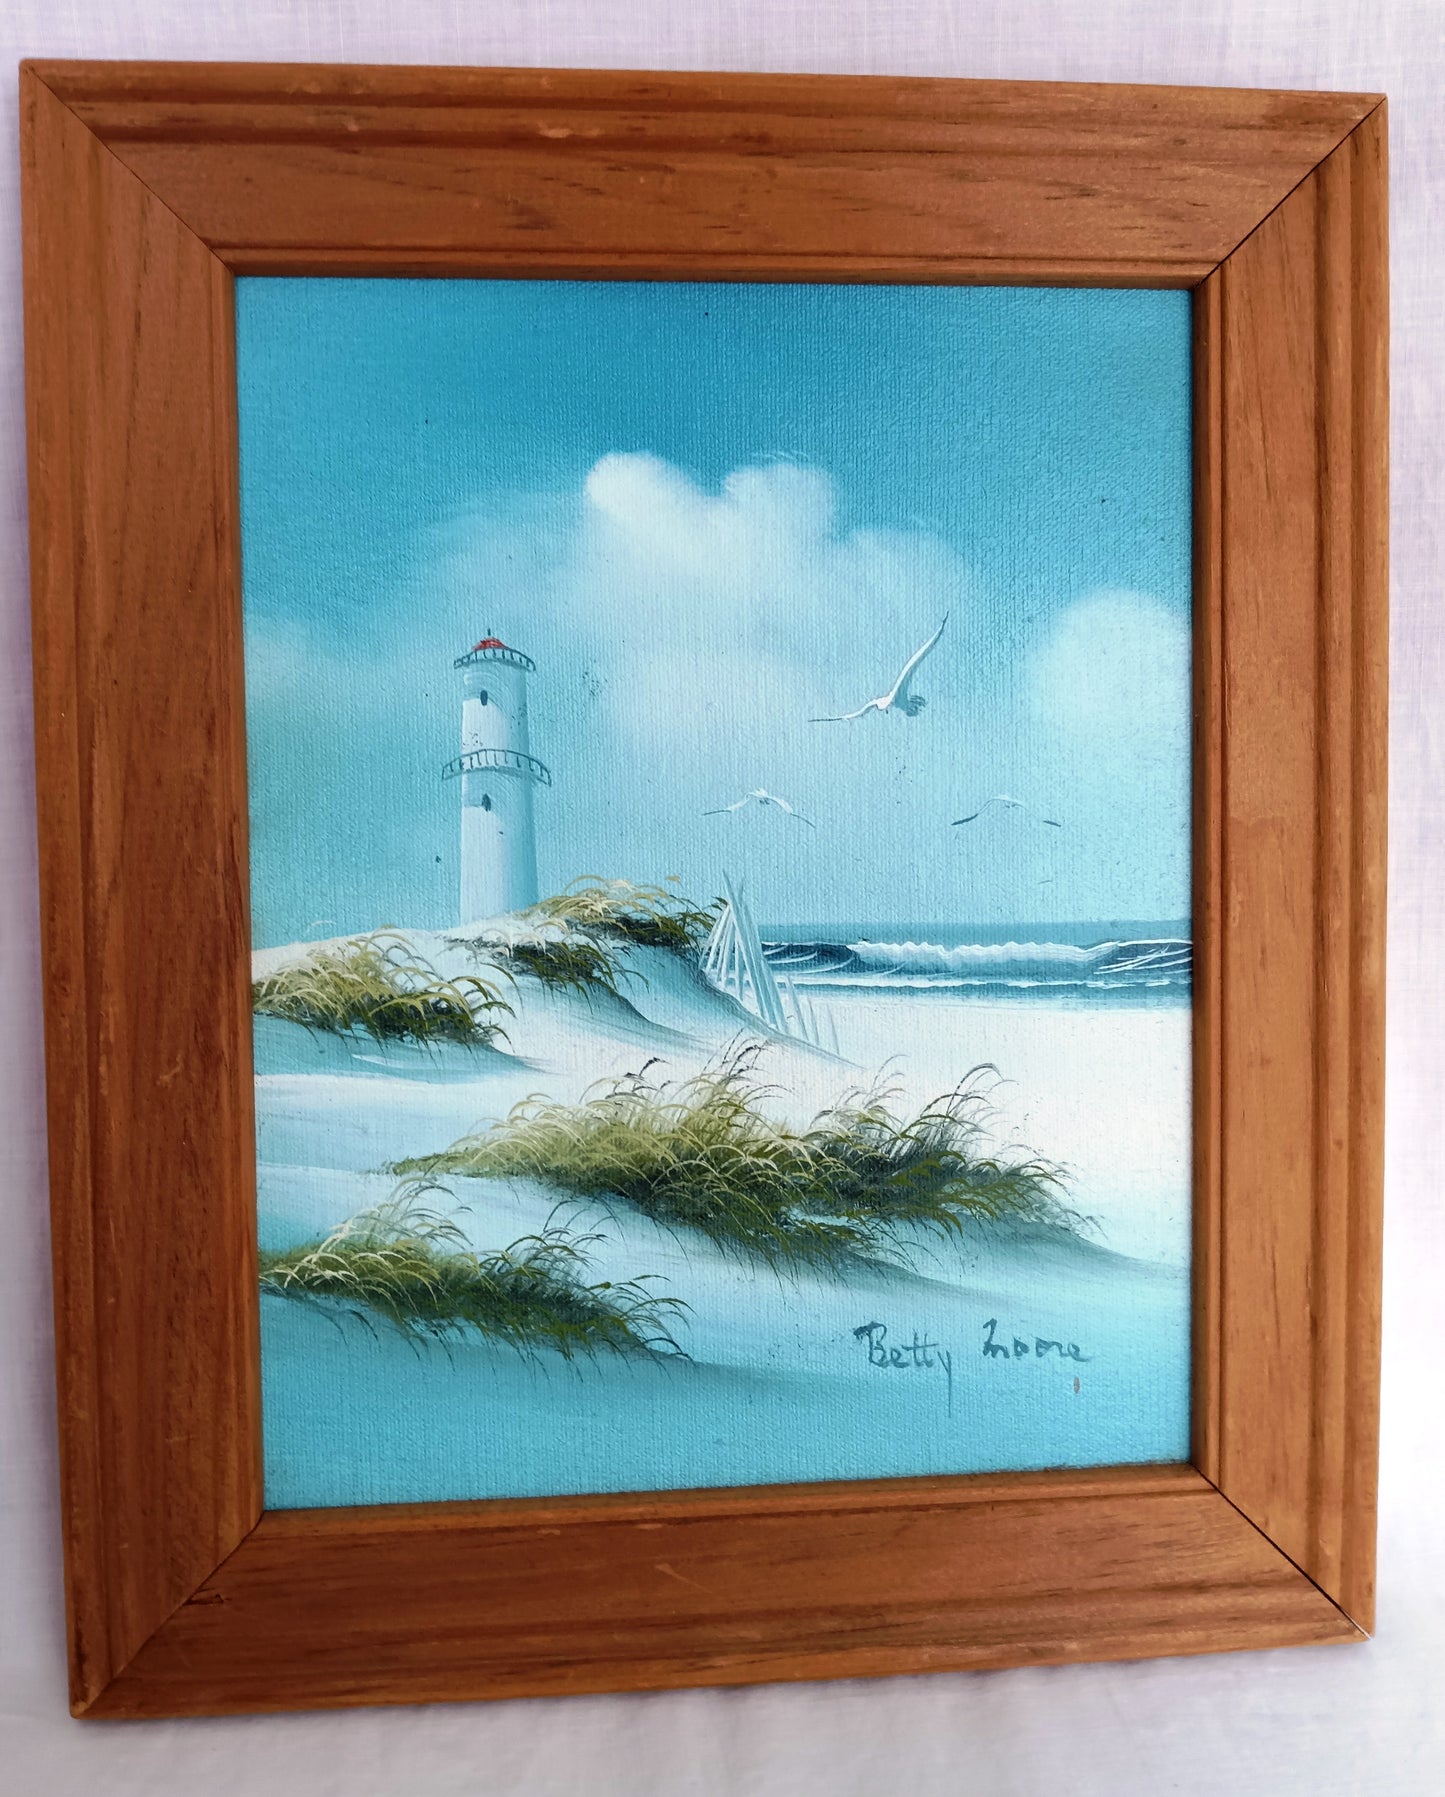 Vintage Oil on Canvas Framed Painting Lighthouse Beach Scene Seascape Seagull Nautical Wall Art Signed Betty Moore